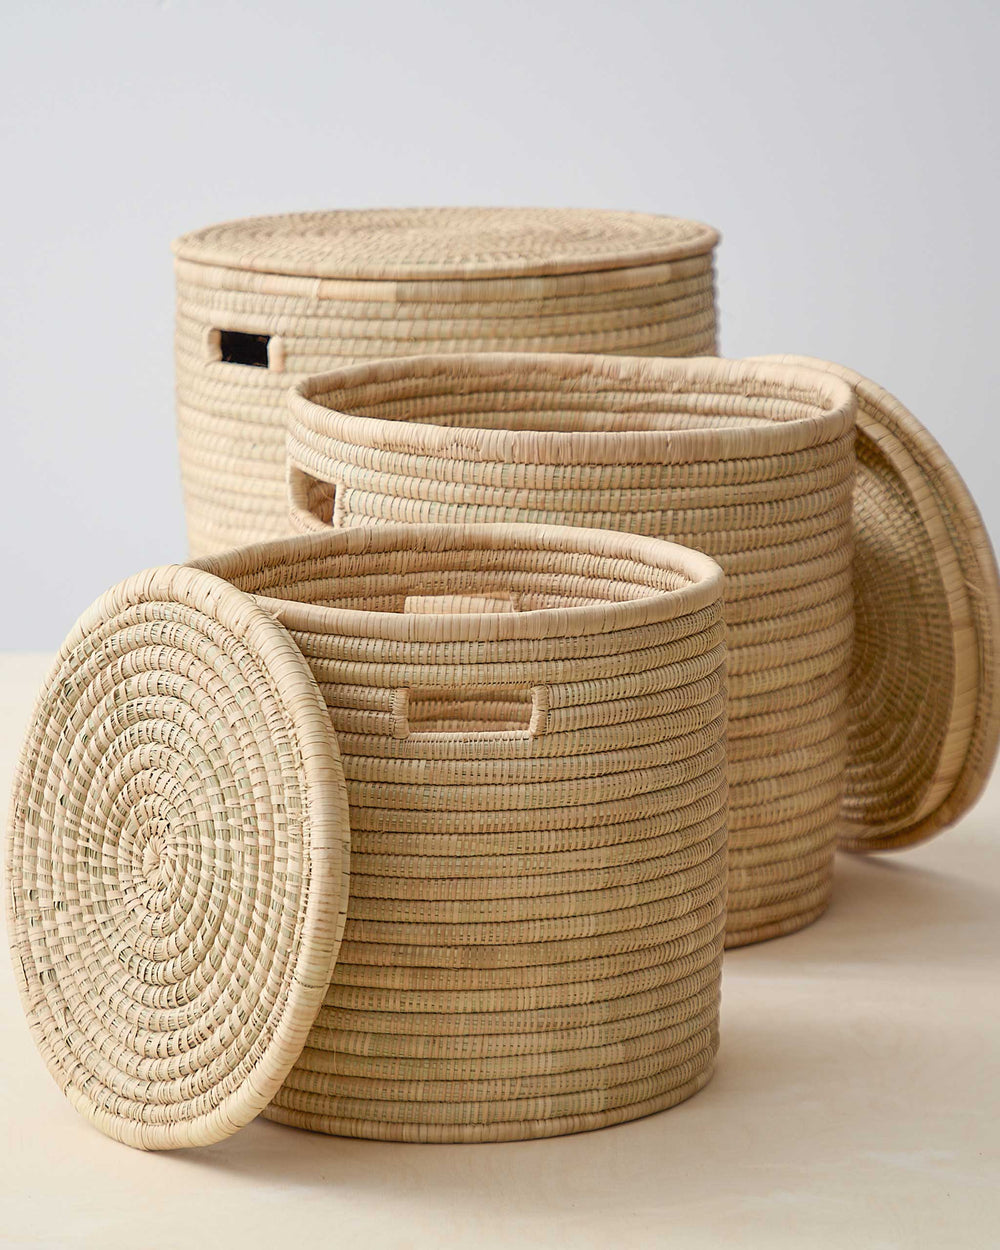 Salima Storage Baskets by Fairkind. Handcrafted by artisans in Malawi.